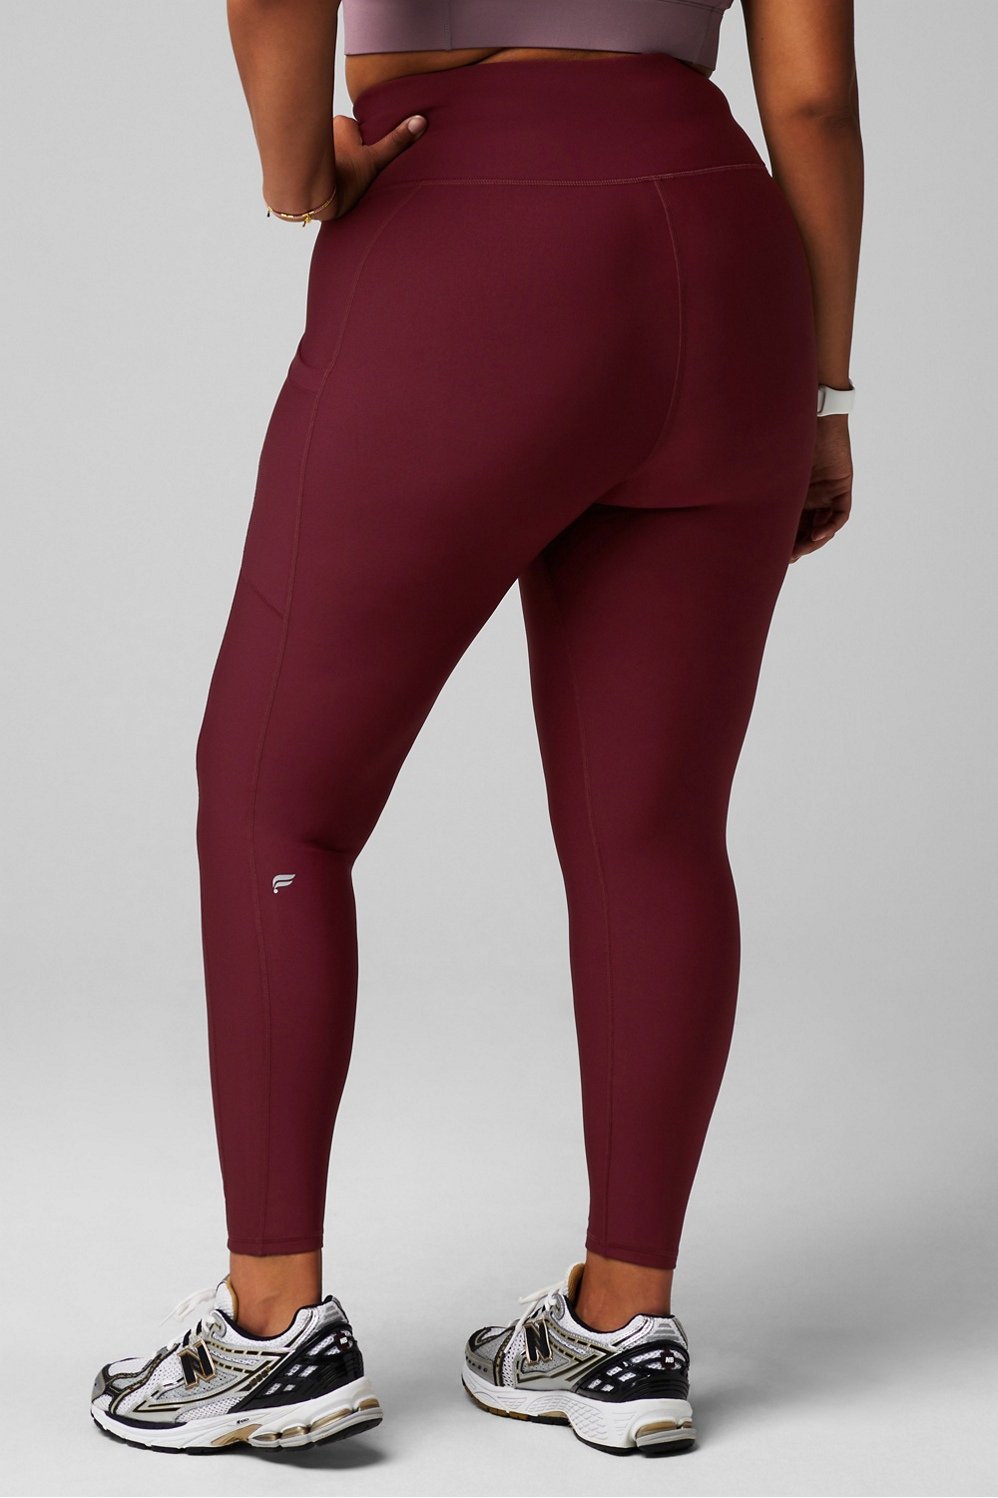 Cold Weather High-Waisted Leggings Fabletics